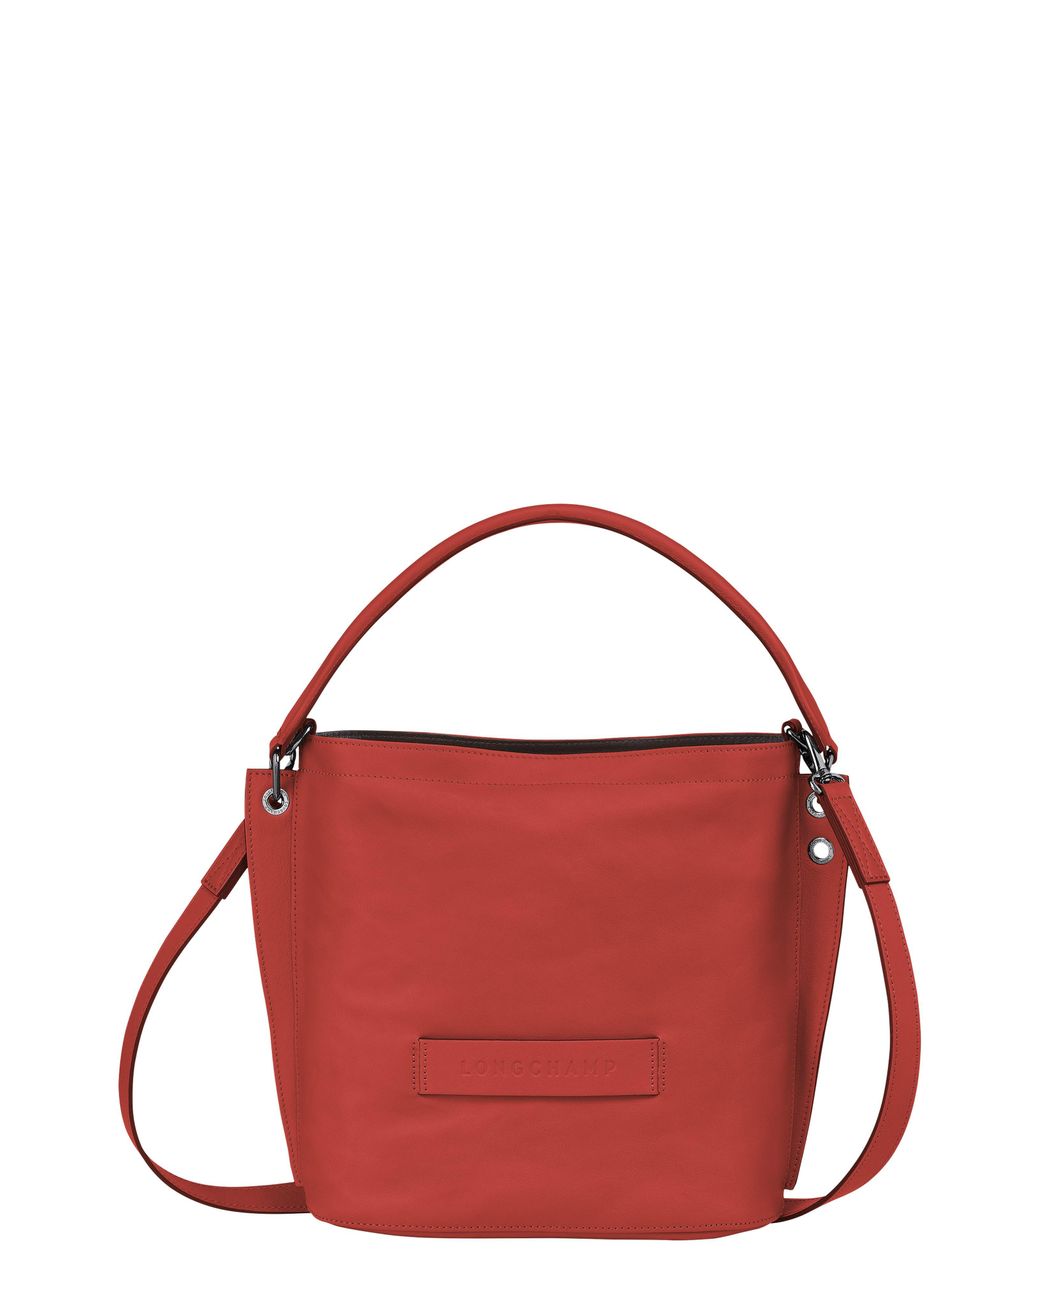 Longchamp Le Cuir Convertible Hobo Bag in Red | Lyst